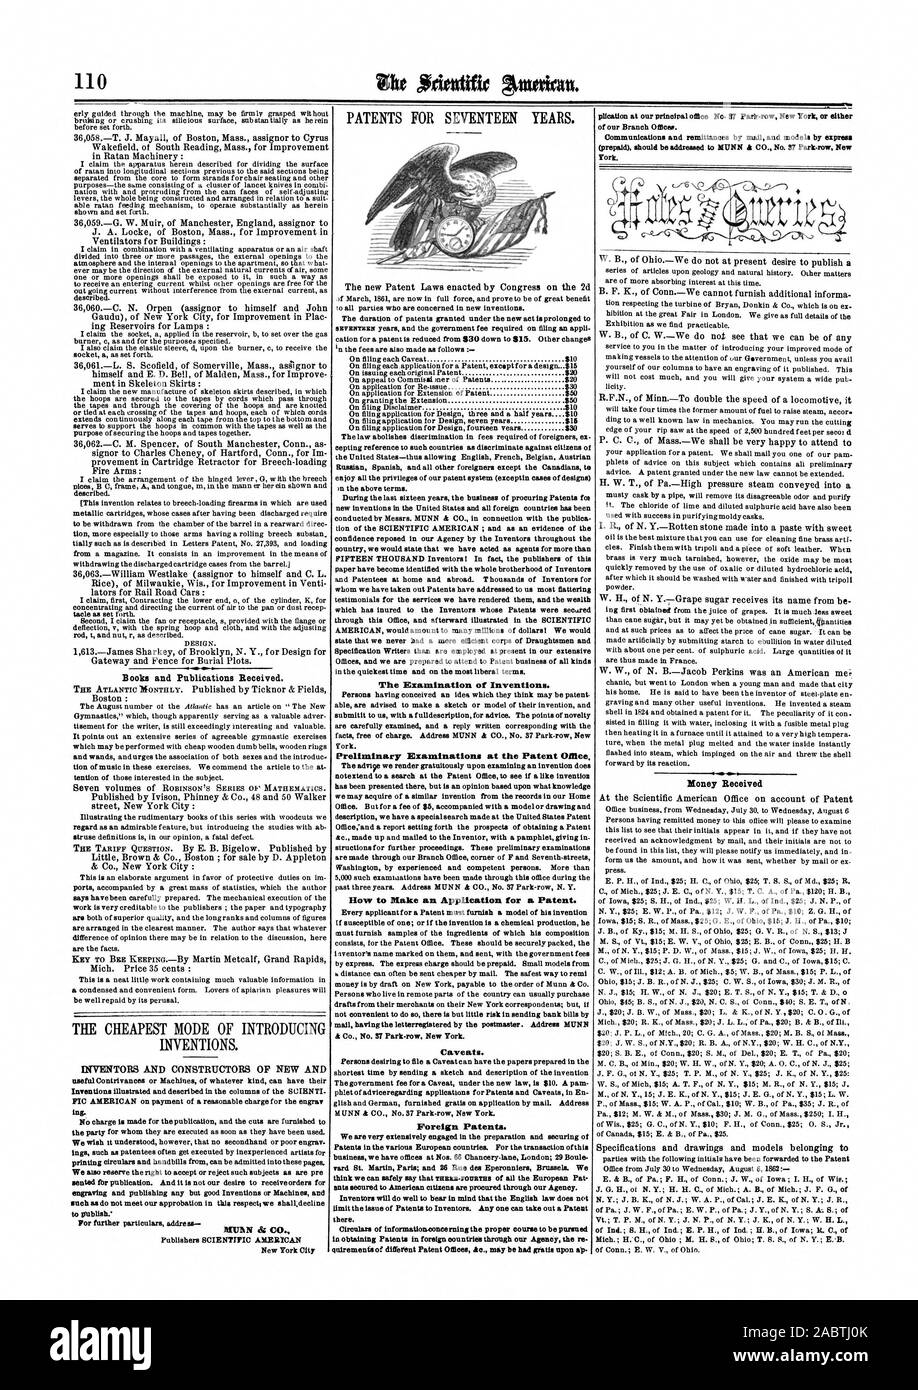 The Examination of Inventions. Preliminary Examinations at the Patent Office. flow to Make an Application for a Patent. Caveats. Foreign Patents., scientific american, 1862-08-16 Stock Photo